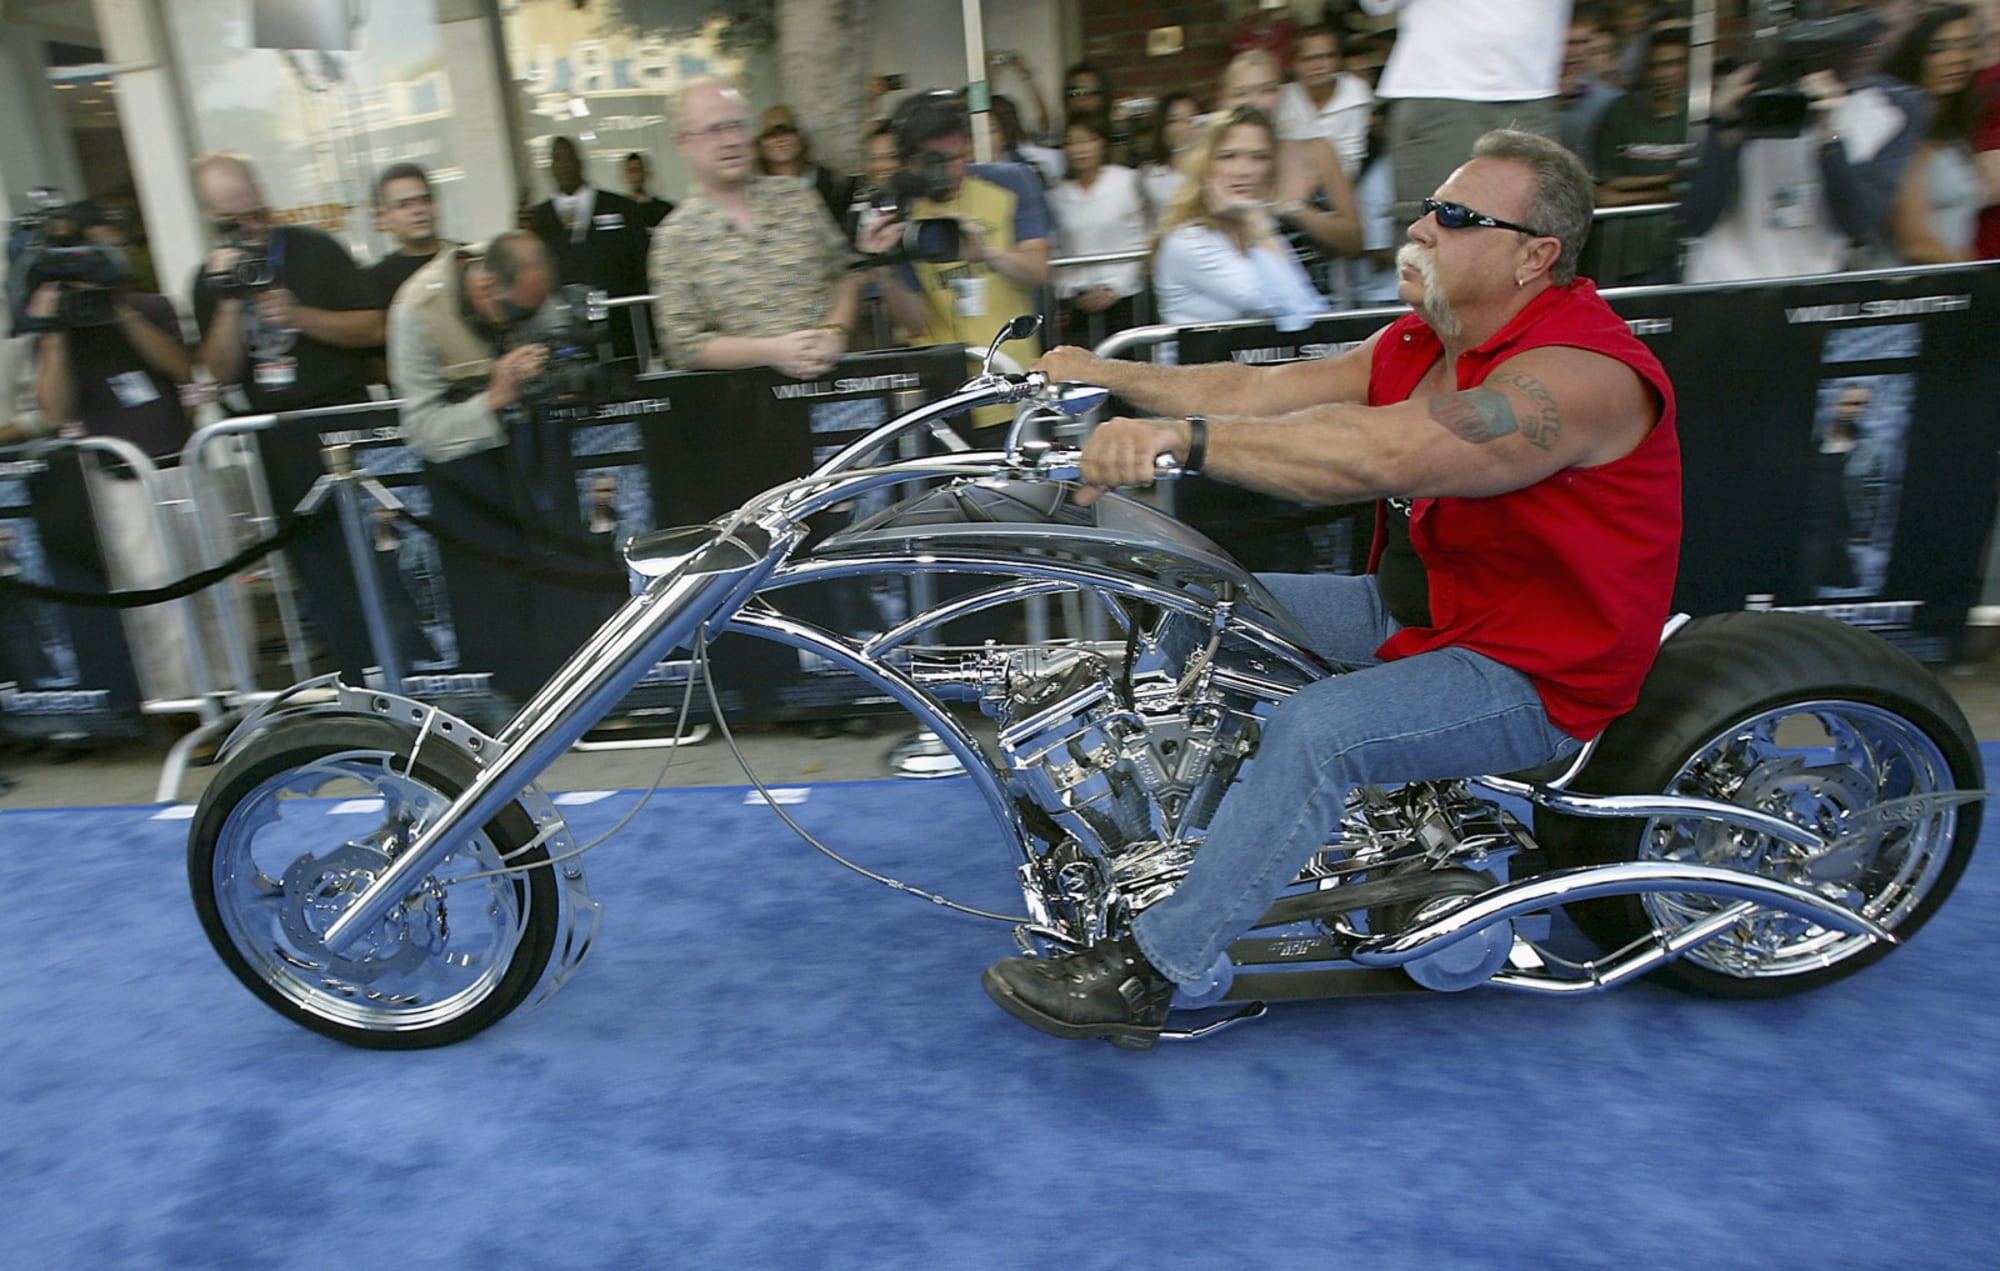 American Chopper is Back TONIGHT with MLB builds, and a '51 Buick!